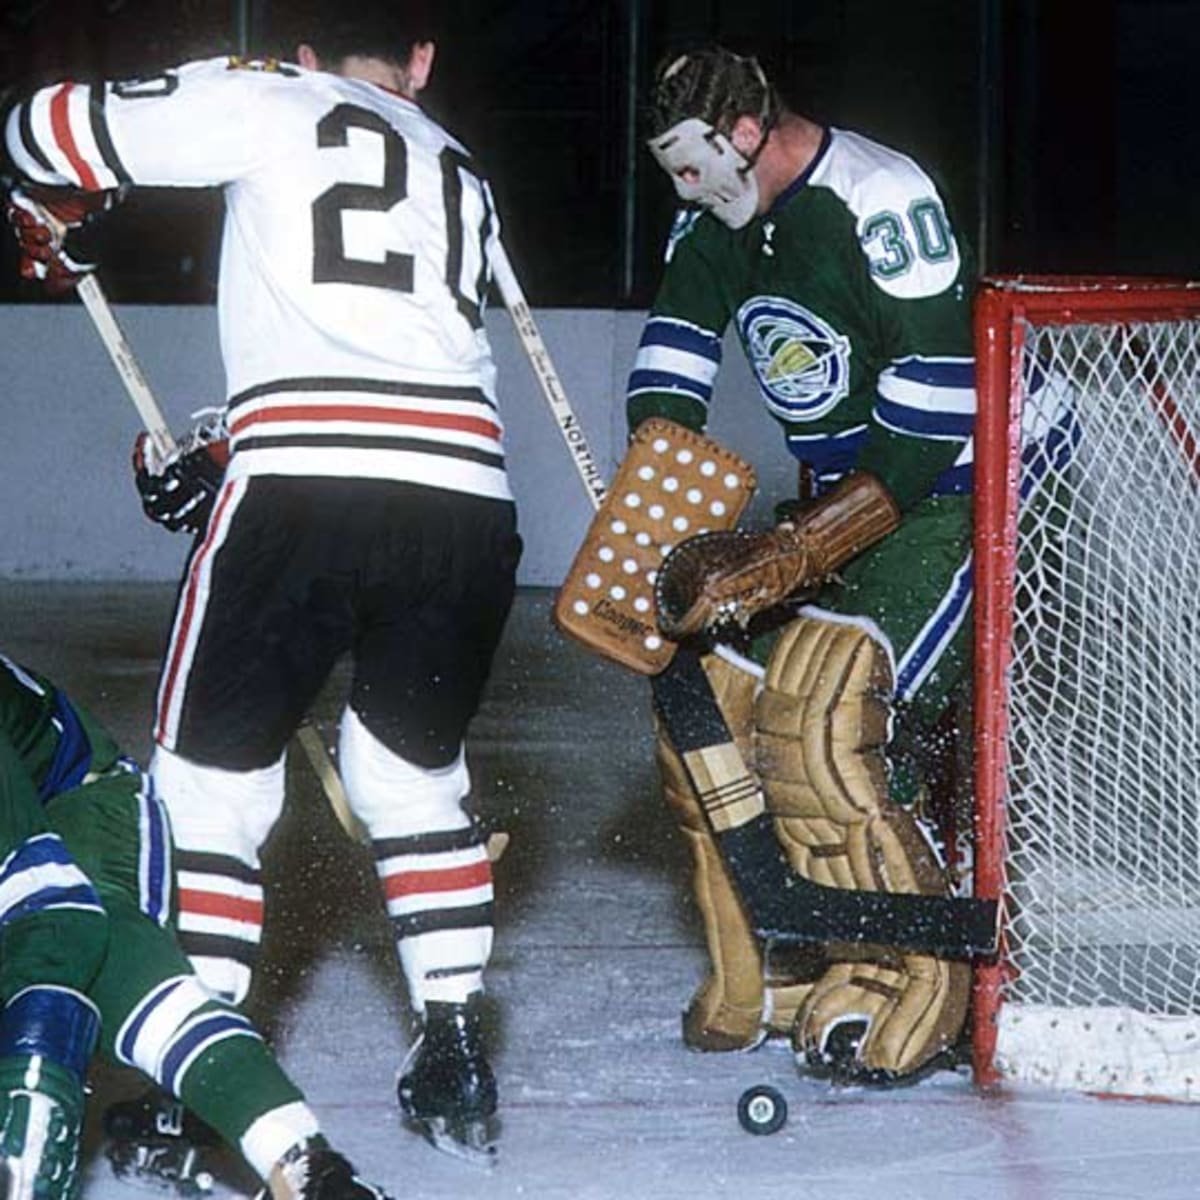 Goalies gone wild: Looking back at the most memorable NHL goalie fights